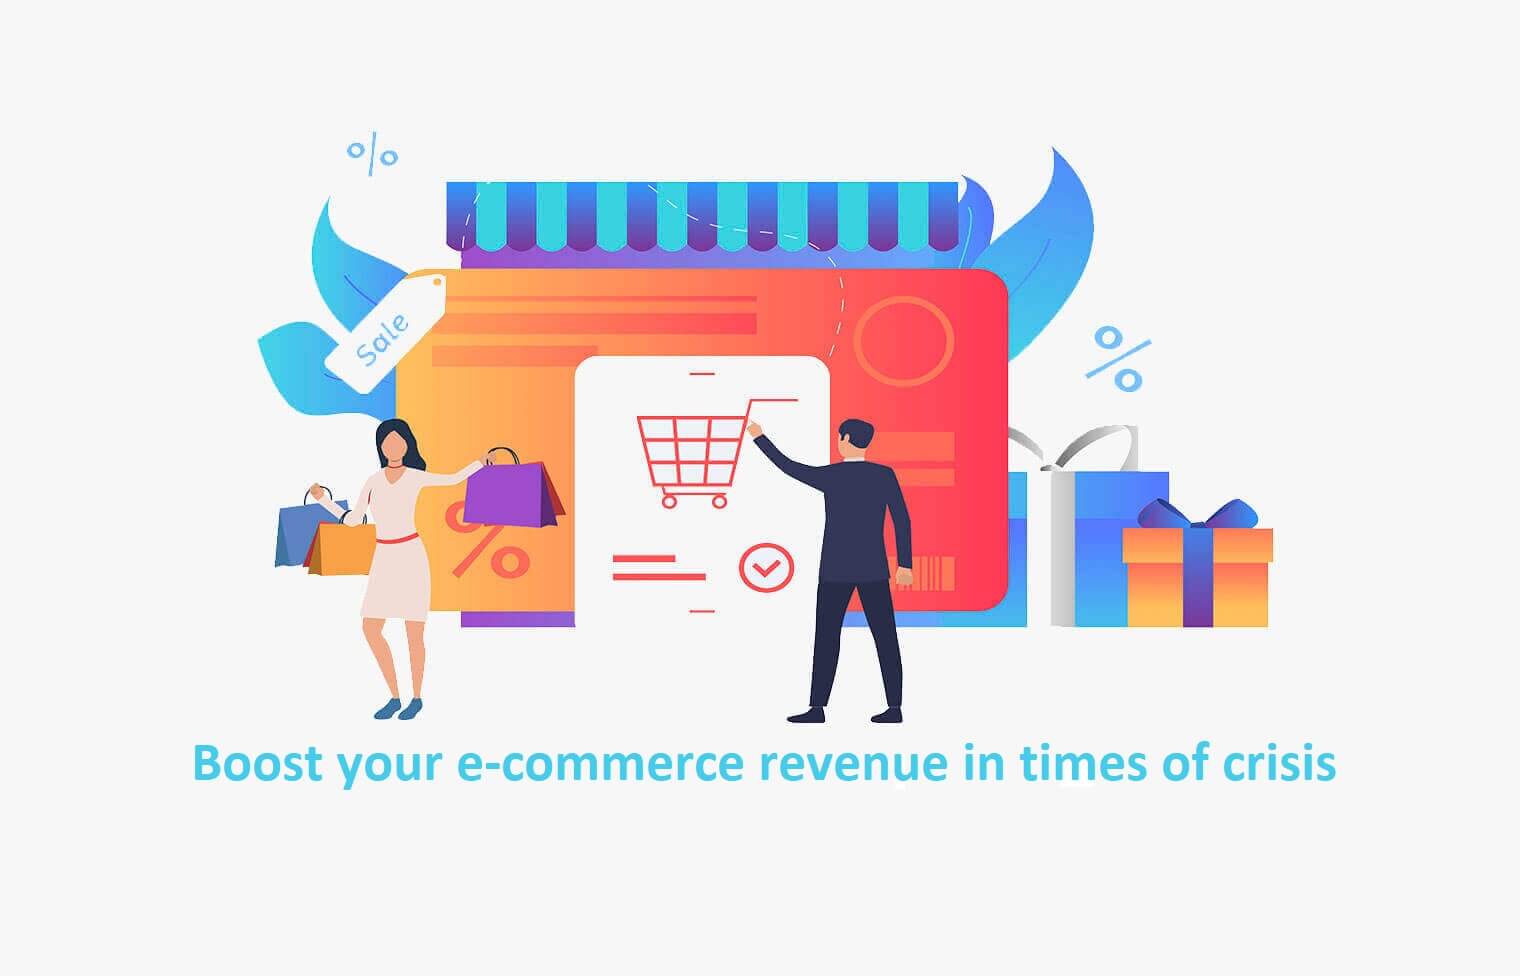 Boost your e-commerce revenue in times of crisis – Expert tips